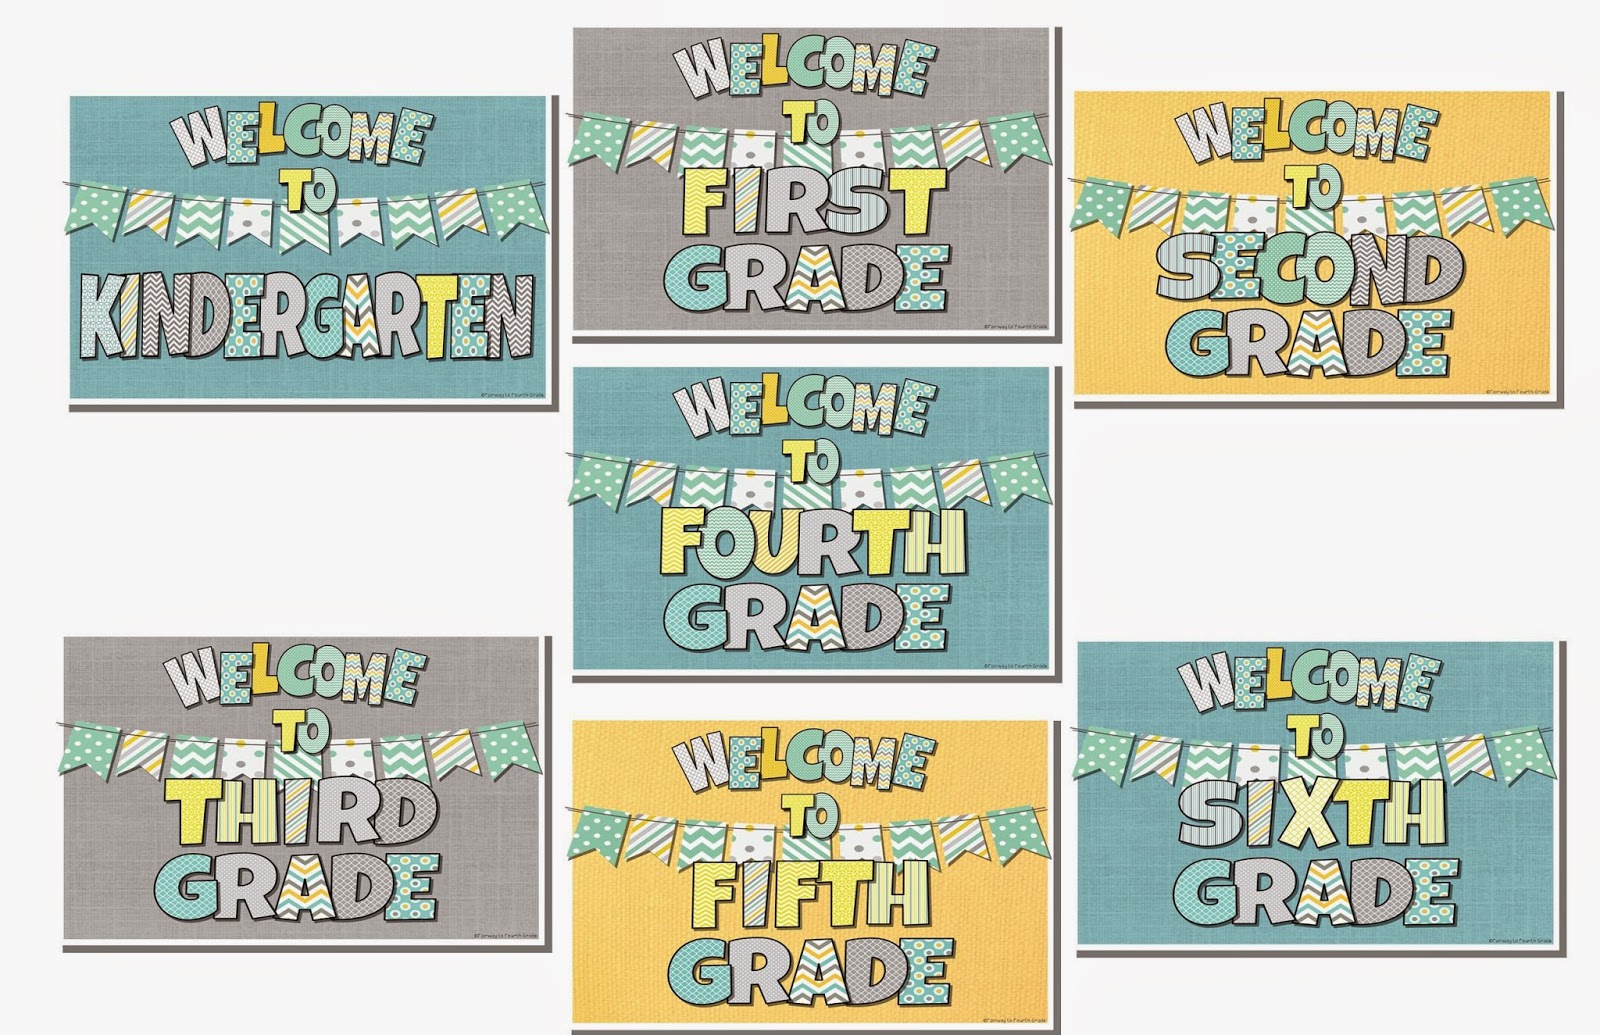 http://sites.google.com/site/fairwaytofourthgrade/Aqua%20yellow%20and%20Gray%20Welcome%20Signs.pdf?attredirects=0&d=1